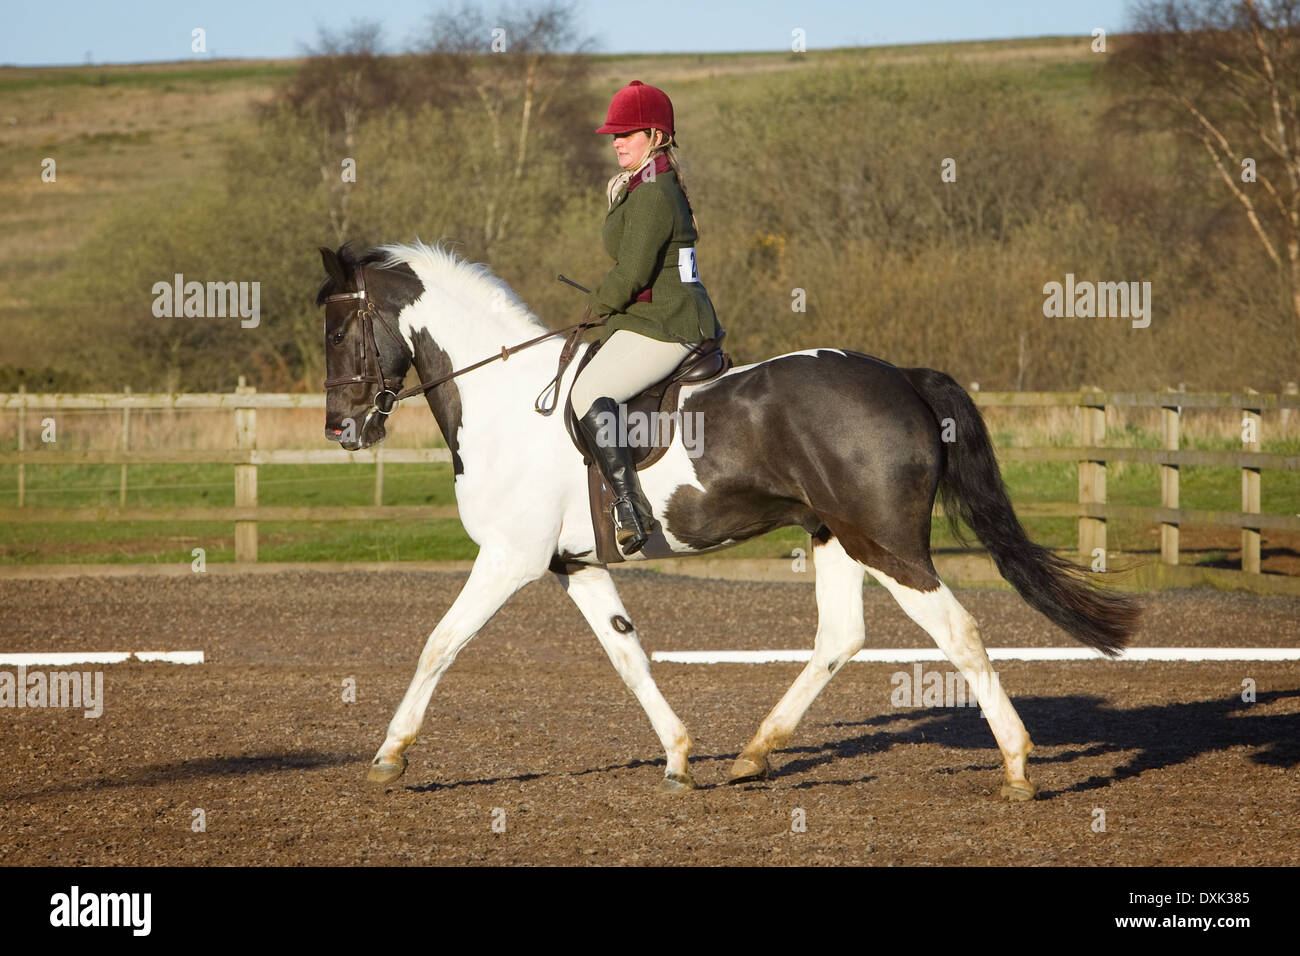 A horse and rider competing in a dressage event held outside on a sand and rubber course in England Stock Photo